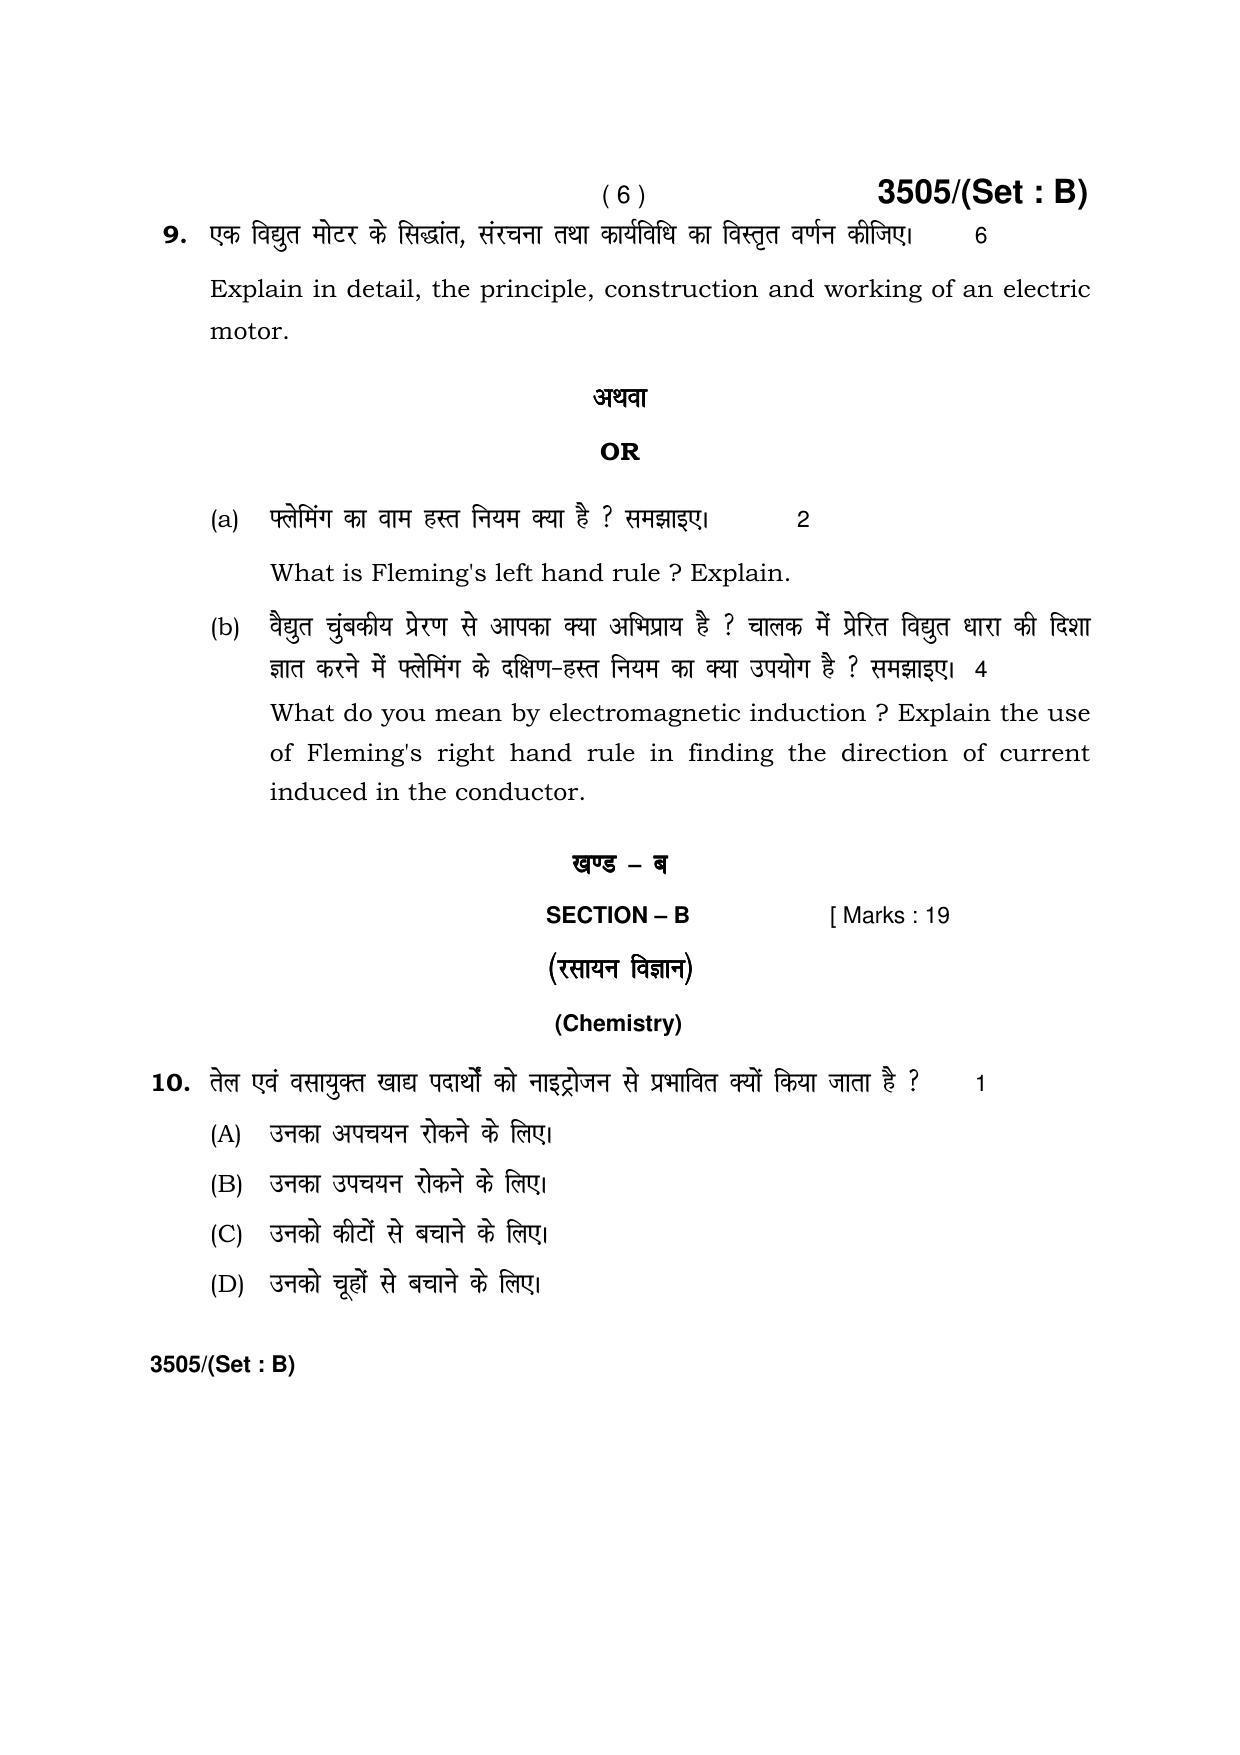 Haryana Board HBSE Class 10 Science -B 2018 Question Paper - Page 6